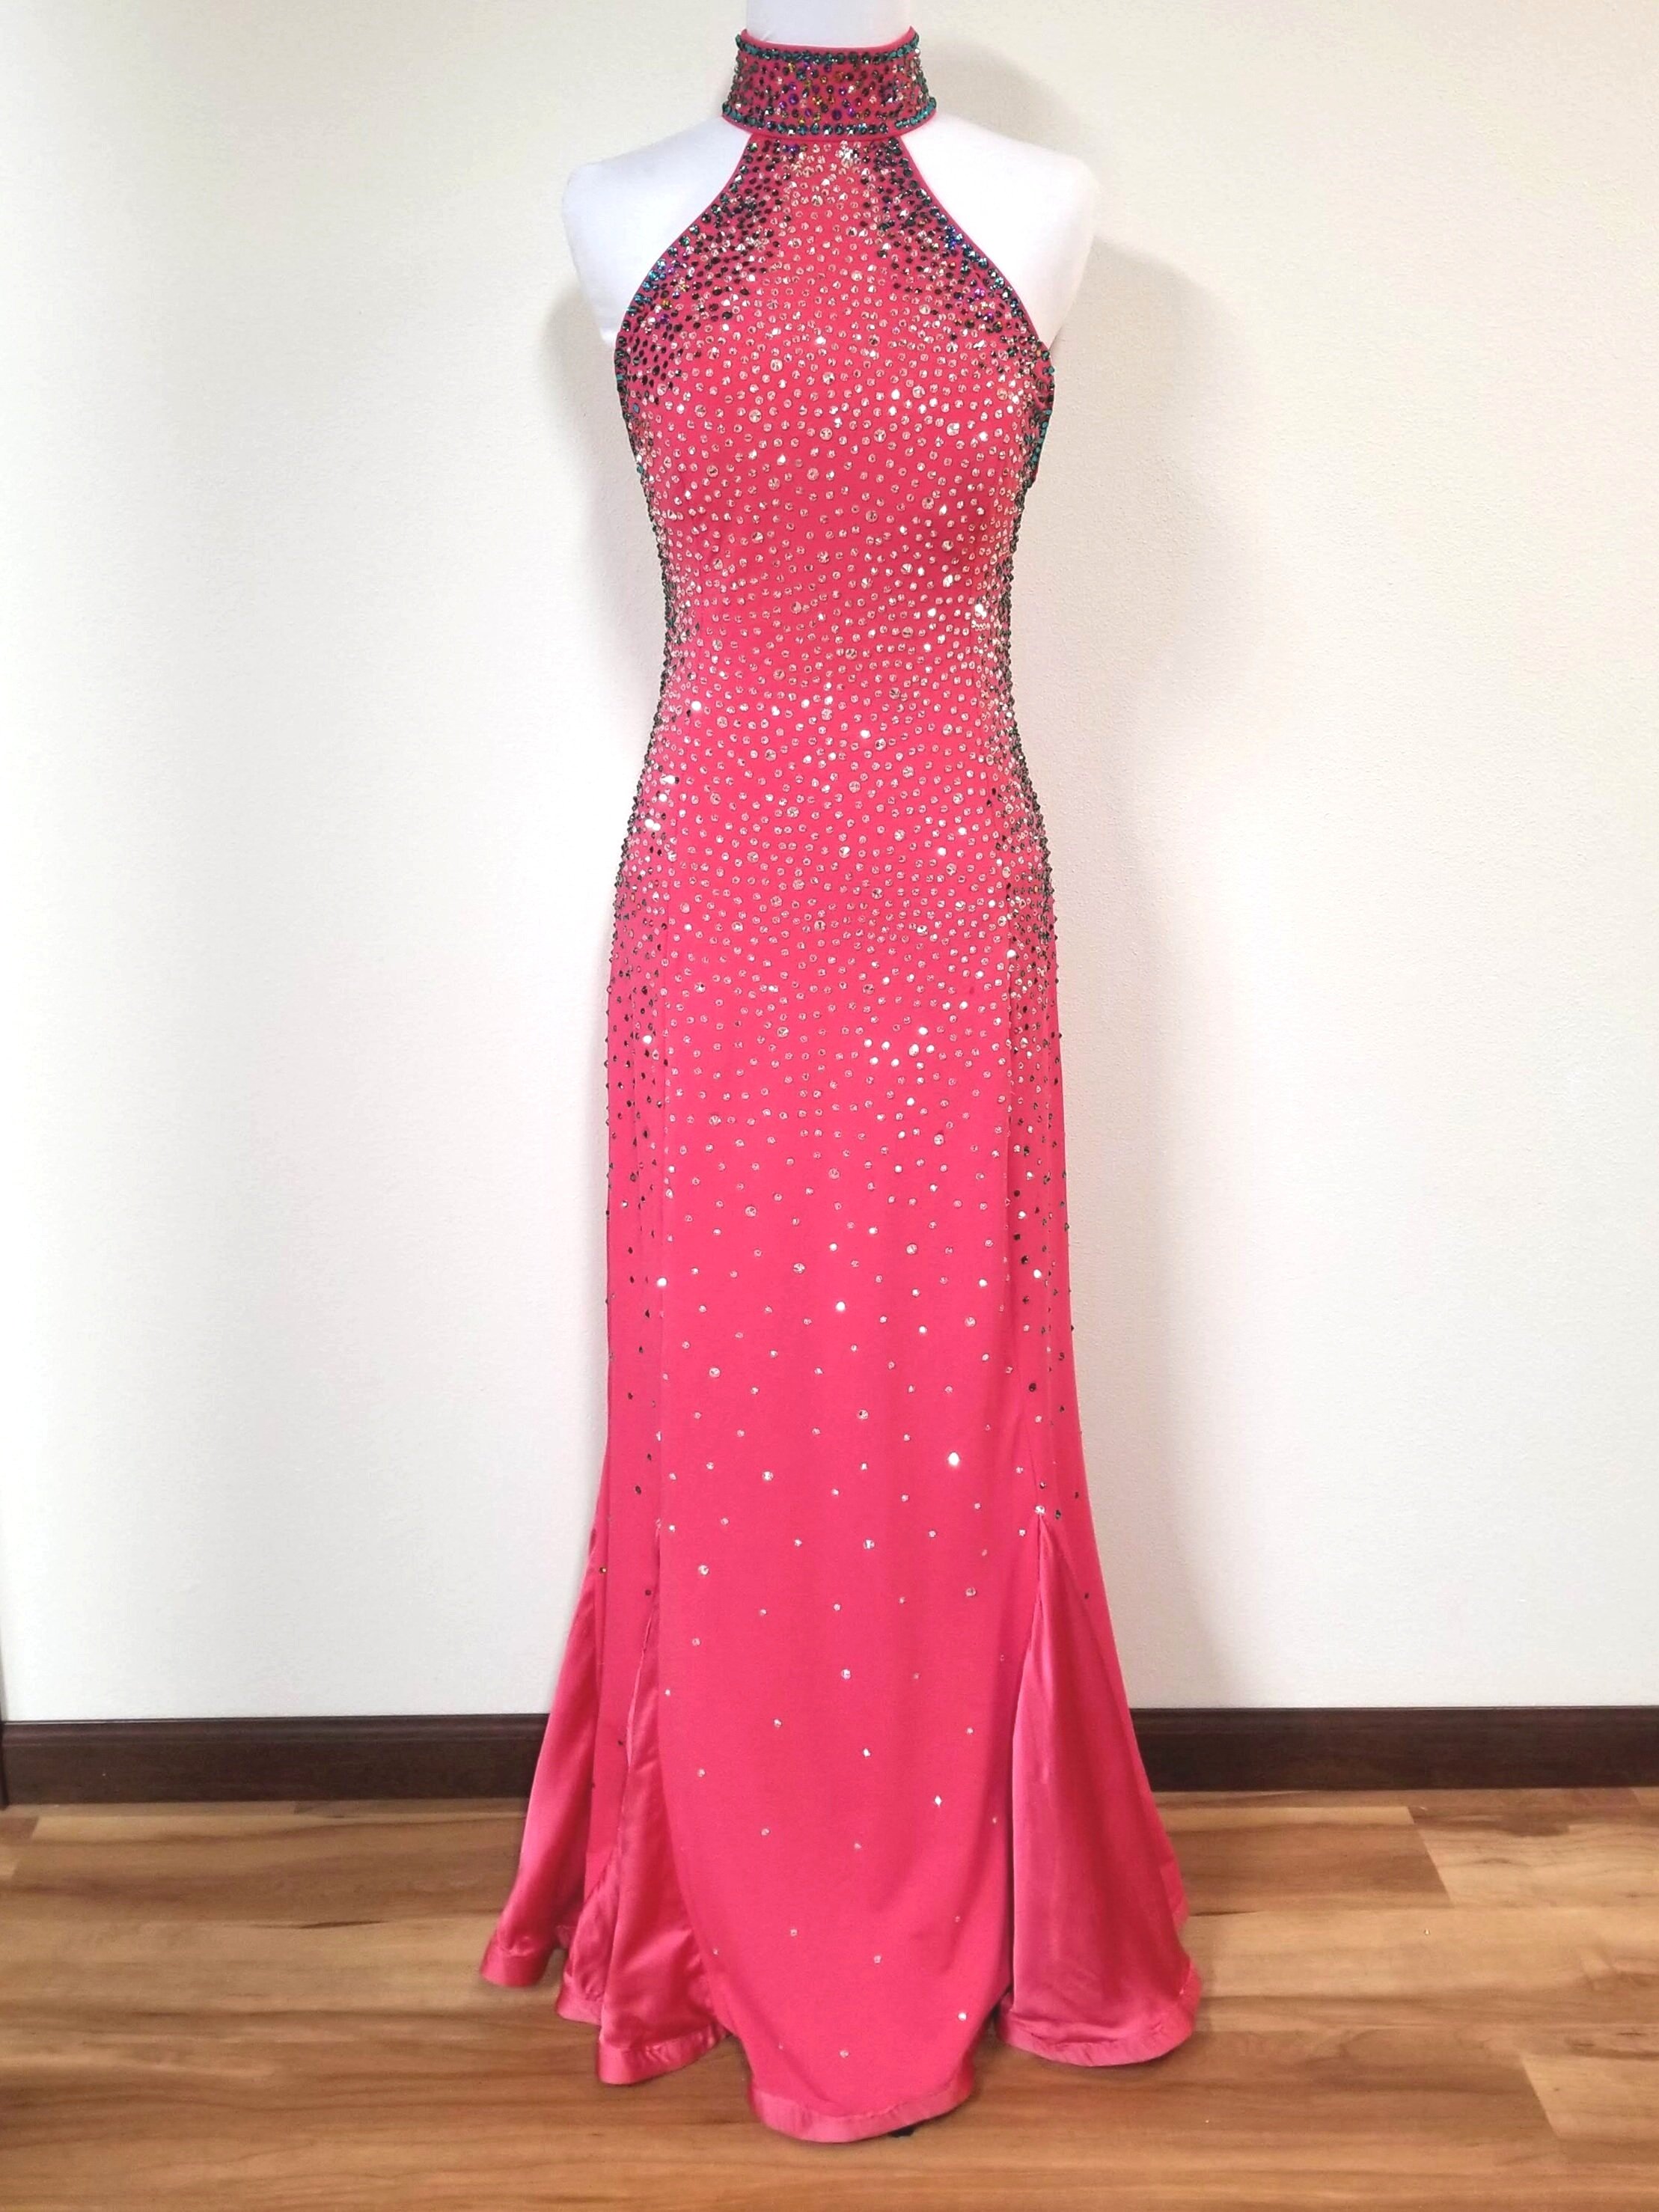 Wine Color One Shoulder Long Sleeve Dress style LD 4296 - Prom-Avenue